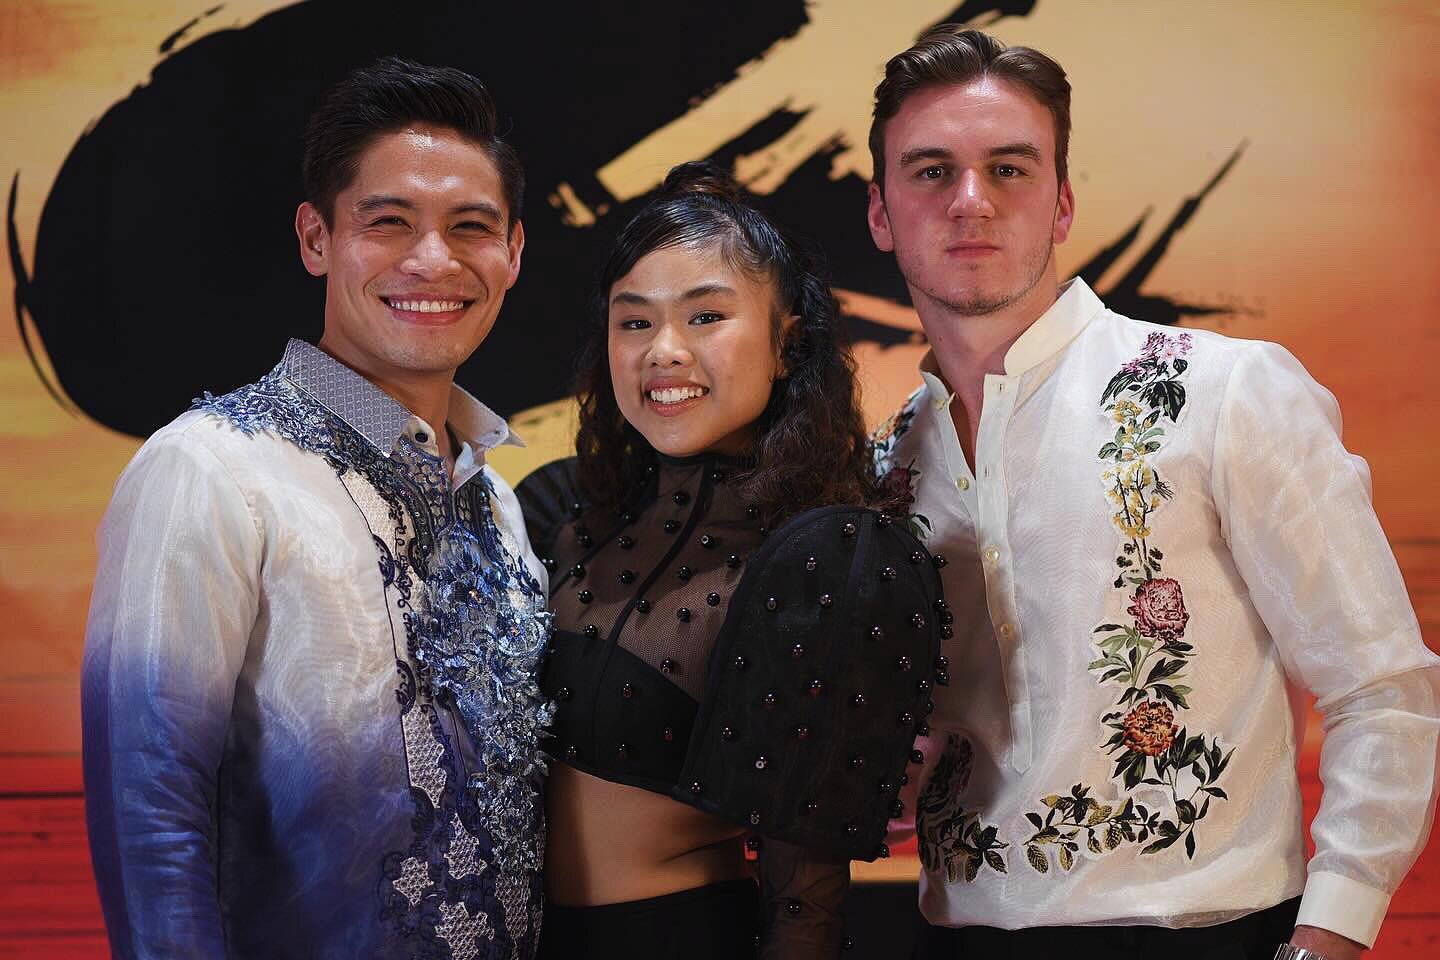 Check these three out! 😍 
T&amp;E international superstars @abigailadrianoo @shazzlerezz and @leytonholmes_ at their opening night of @misssaigonint in Manila! Looking amazing as always team 🎉🧡🙌🏽
#misssaigon #openingnight #manila #tandemanagemen